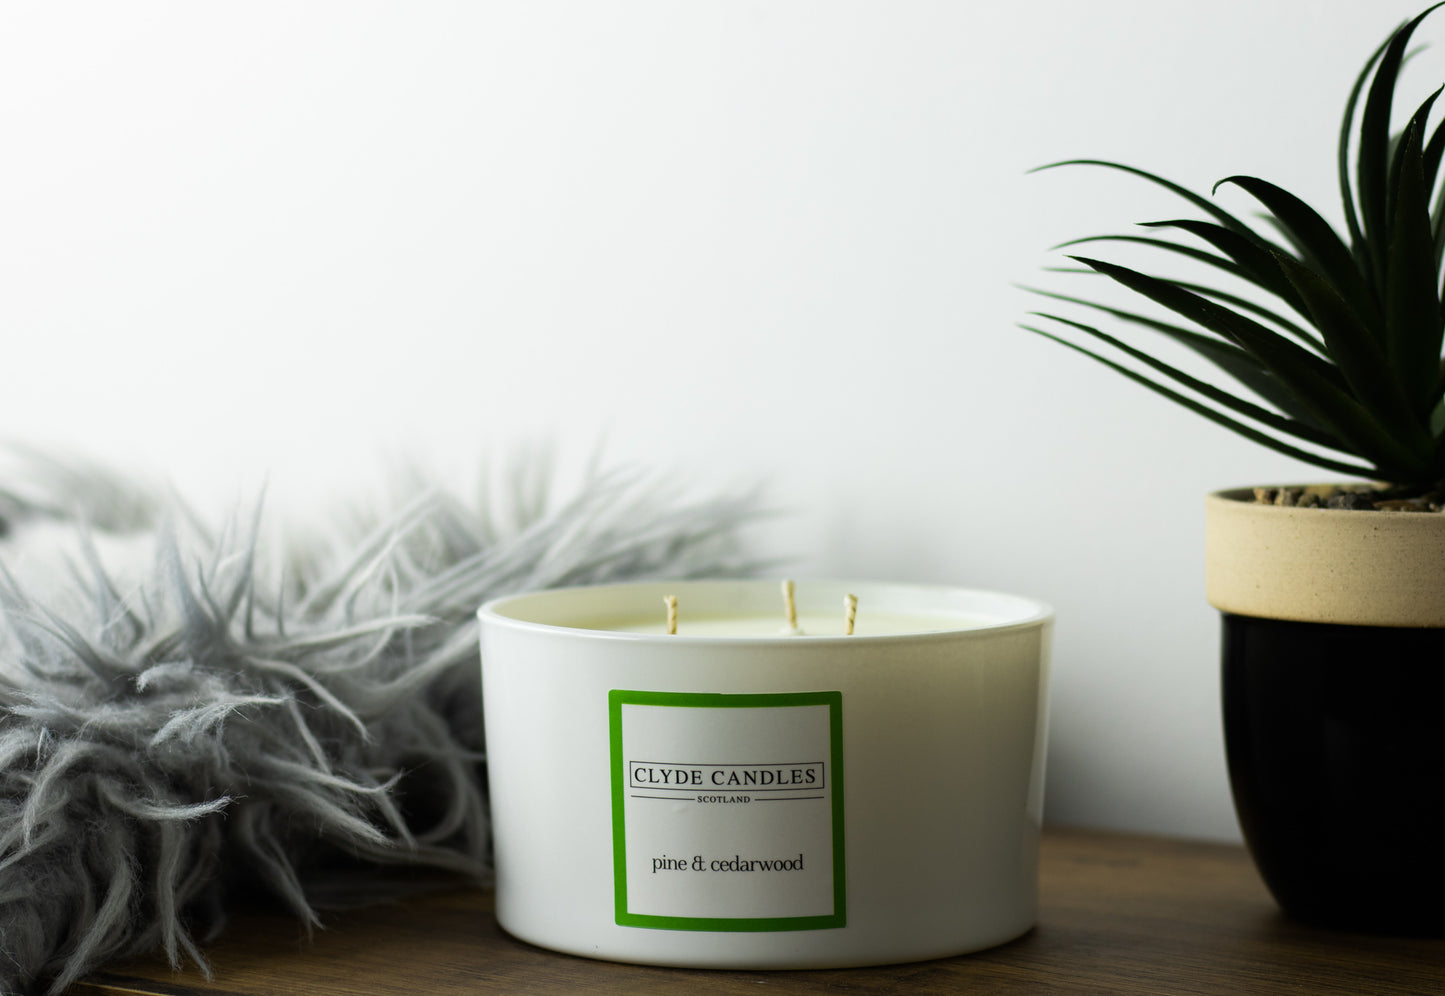 pine cedarwood natural soy candle, christmas tree candle, scottish gifts made in scotland